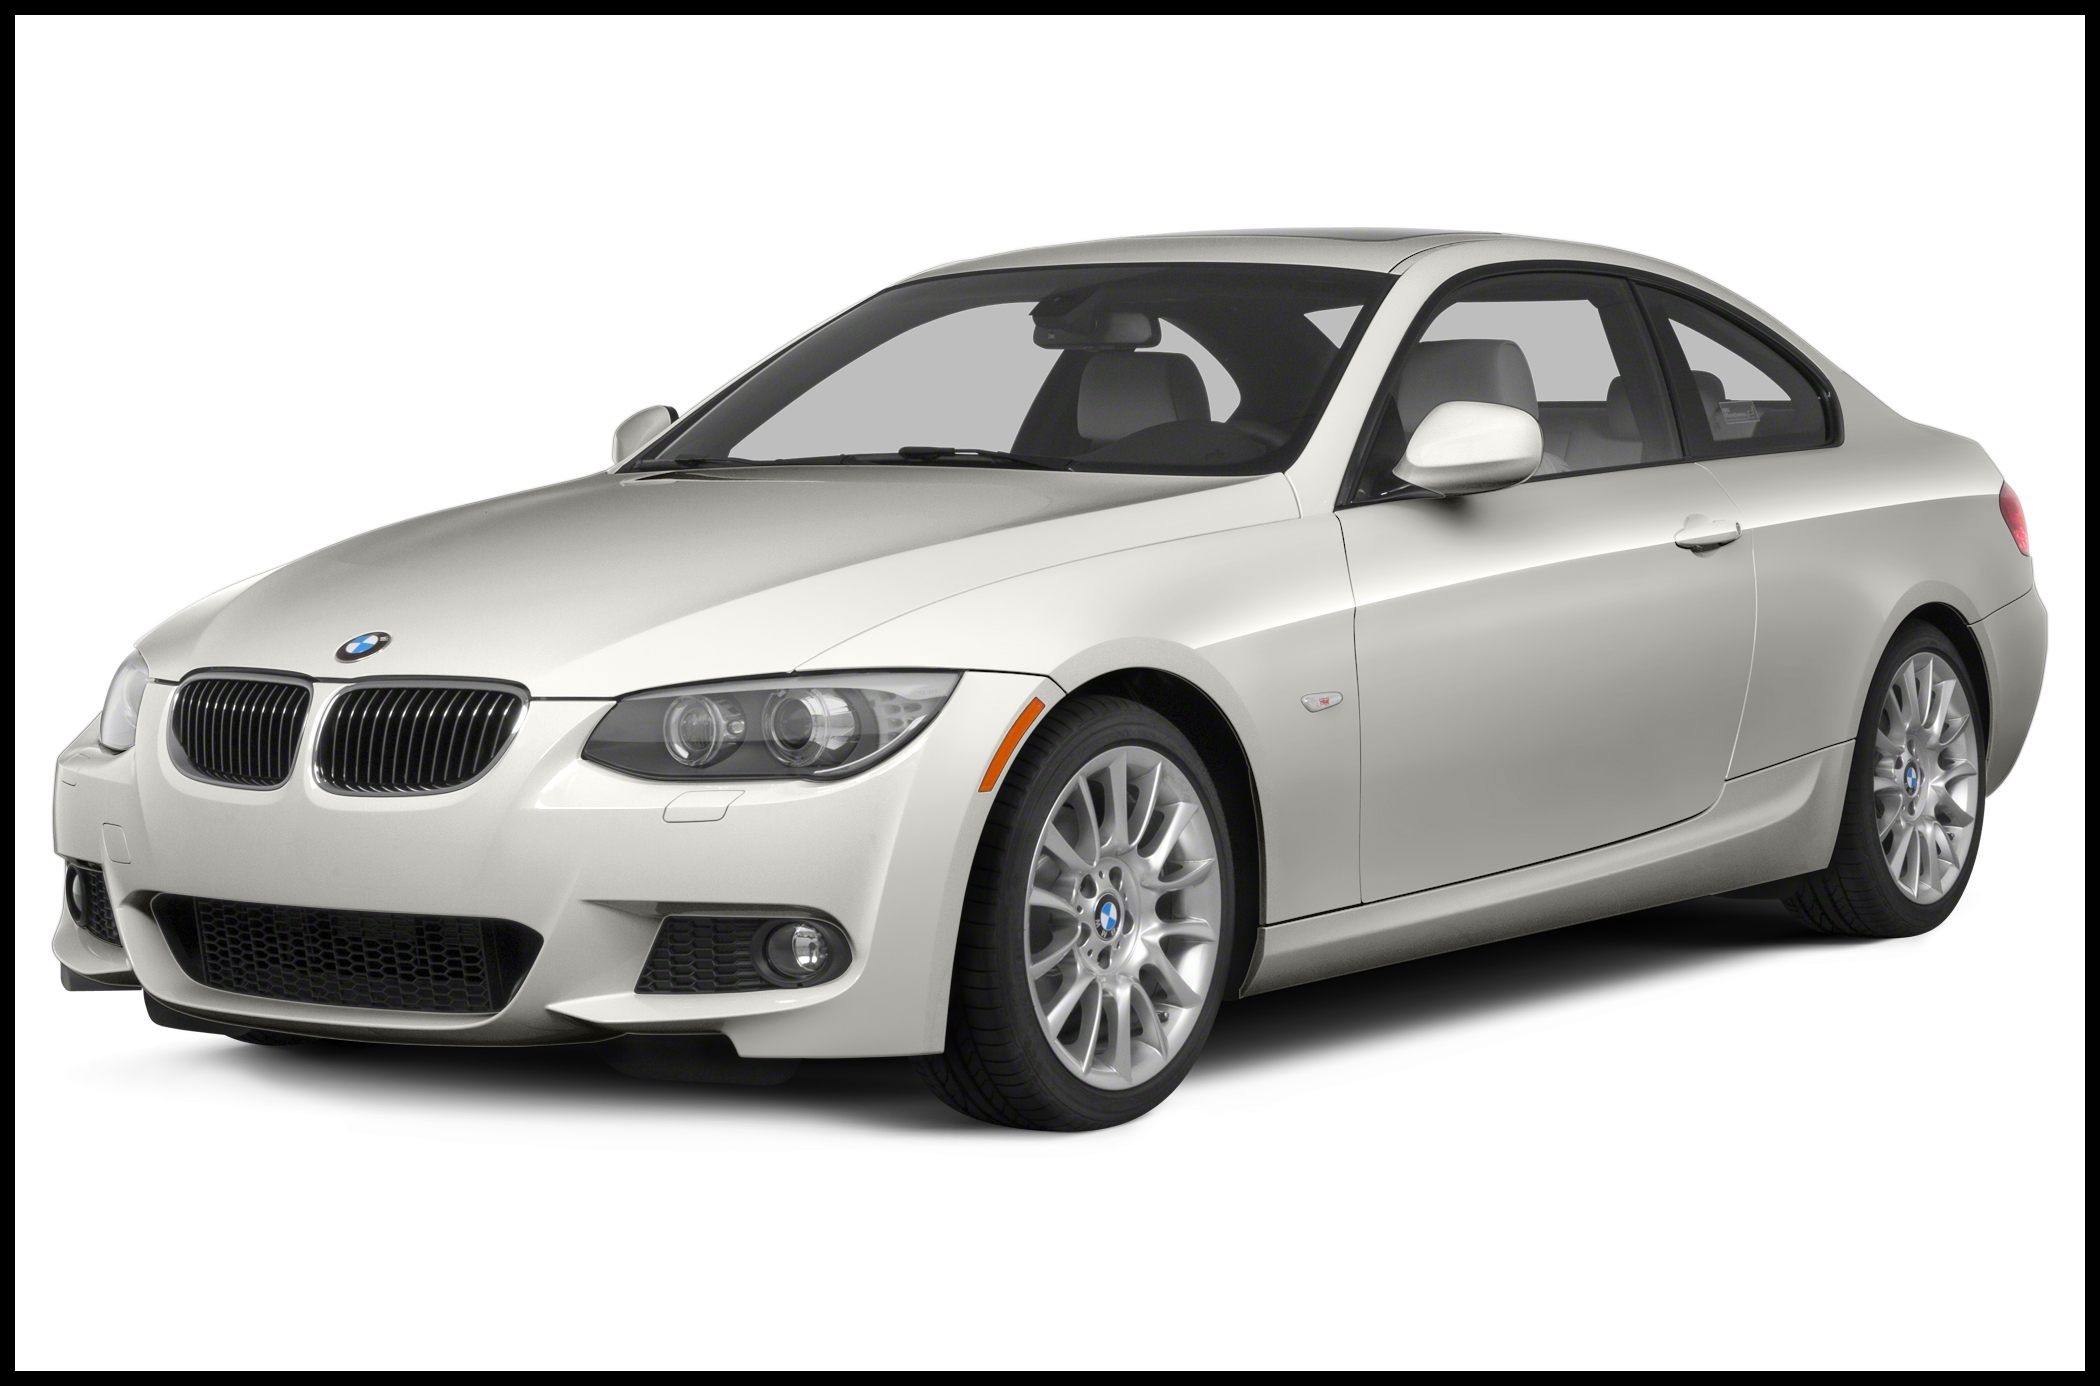 2011 Bmw 335i Xdrive Coupe for Sale Lovely 2013 Bmw 335 New Car Test Drive